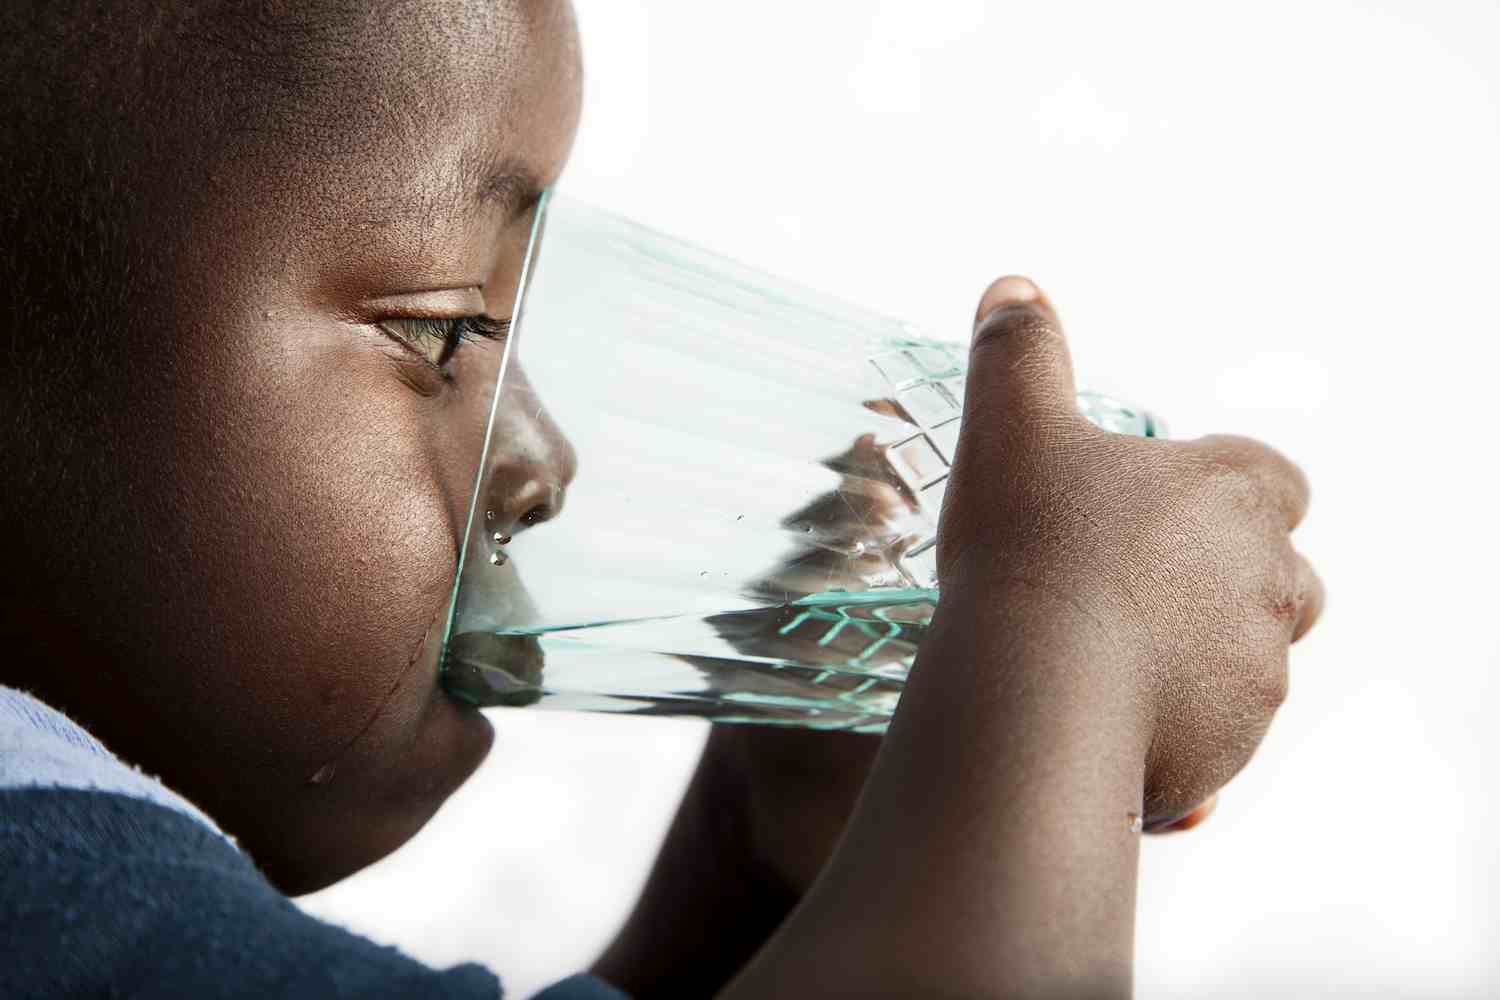 After a UNICEF water project in his Malawi village, Tamdani, 2, has access to clean, safe drinking water